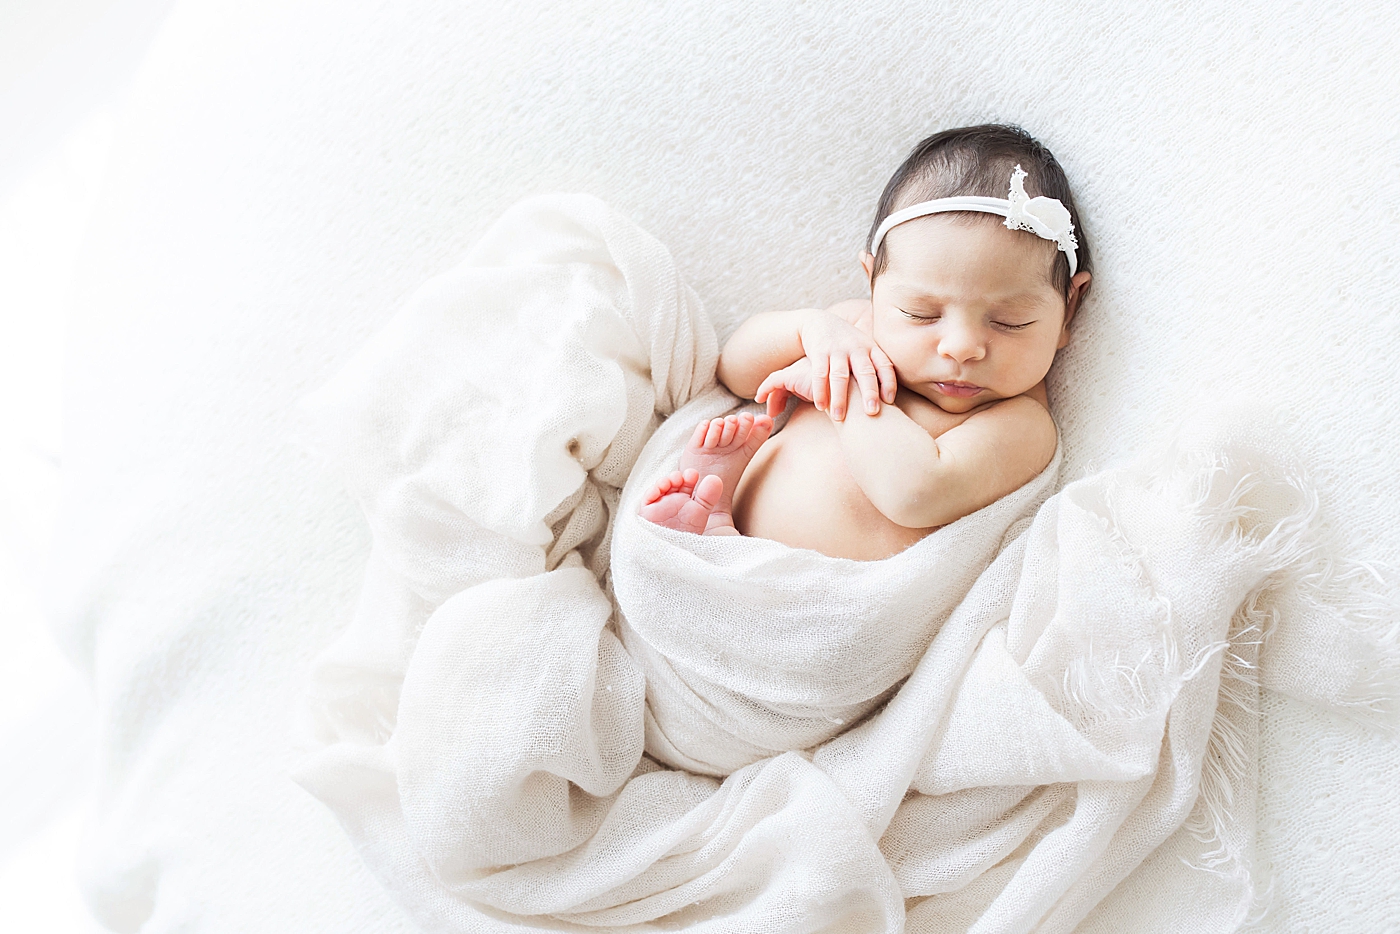 Newborn baby girl curled up in swaddle blanket. Photo by Fresh Light Photography.